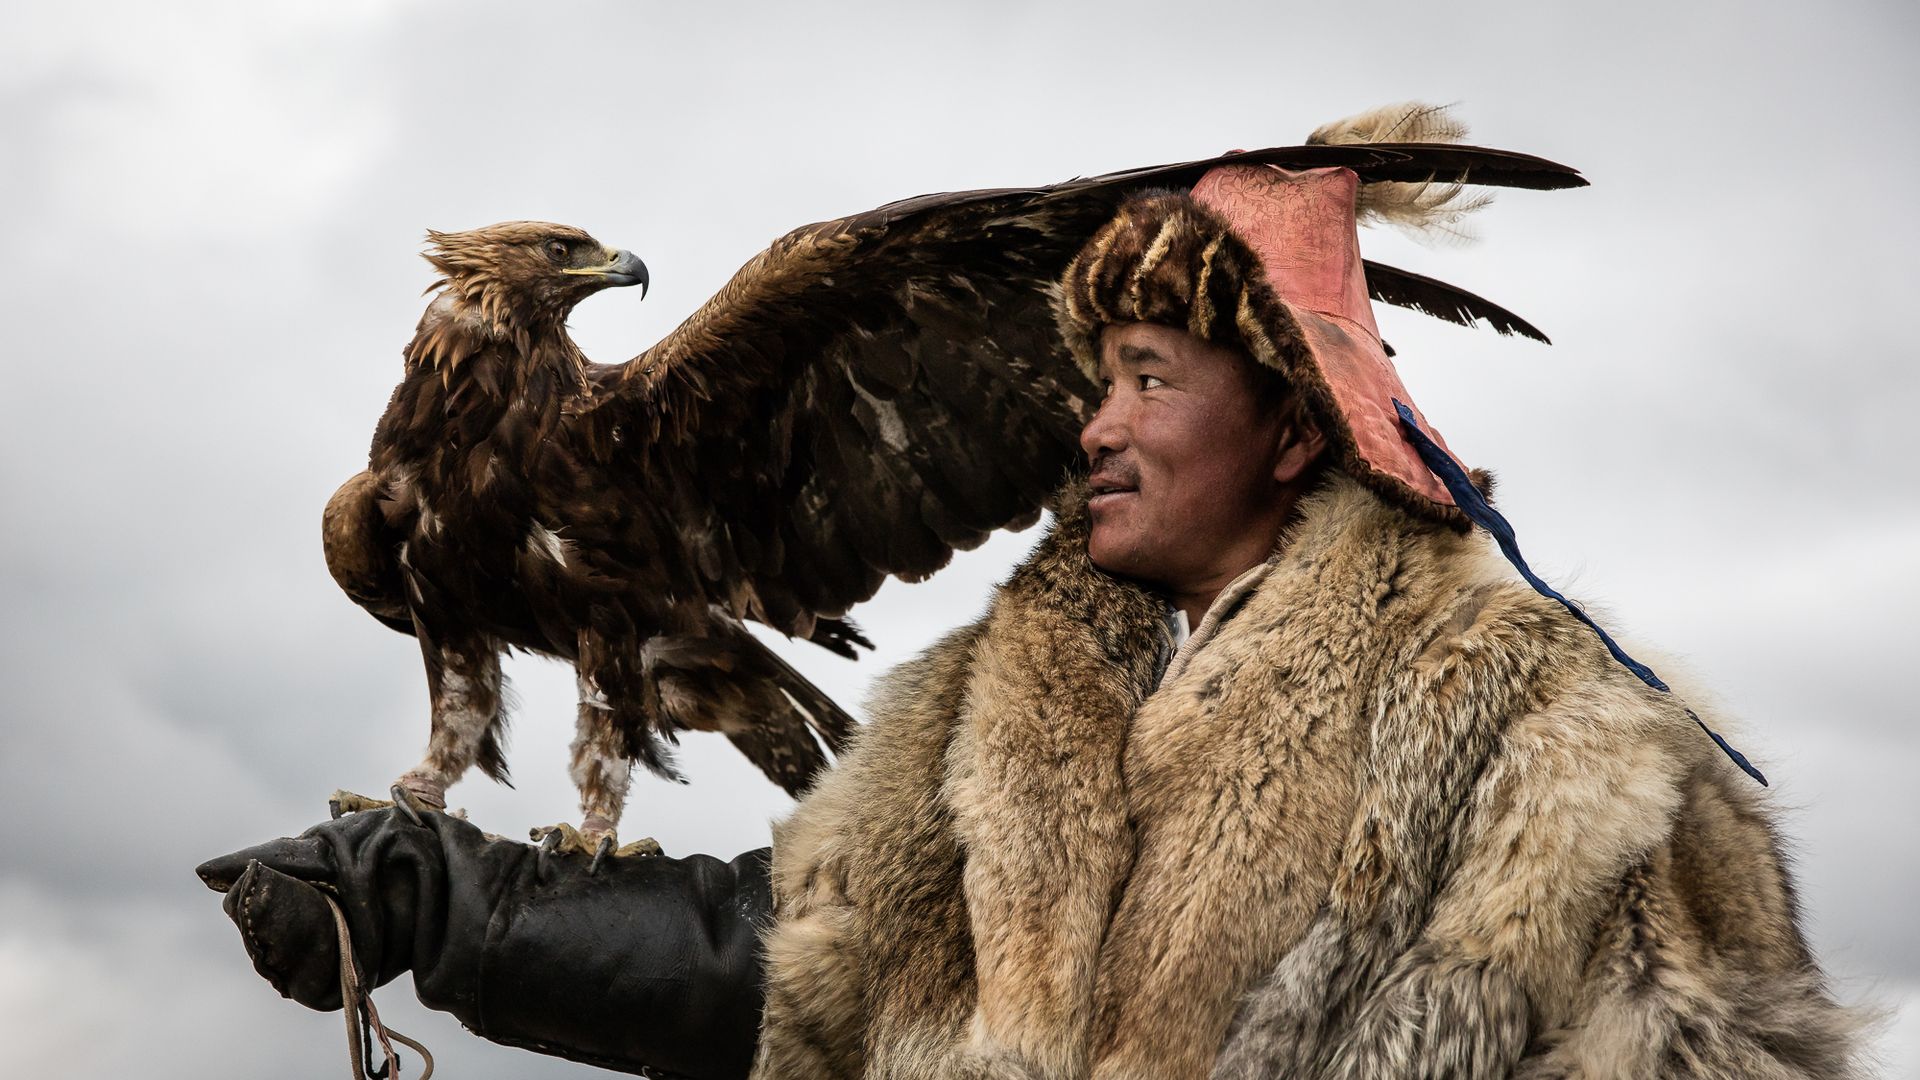 Eagles form a close bond with their hunters during training in Altai Mountain Range, Mongolia.